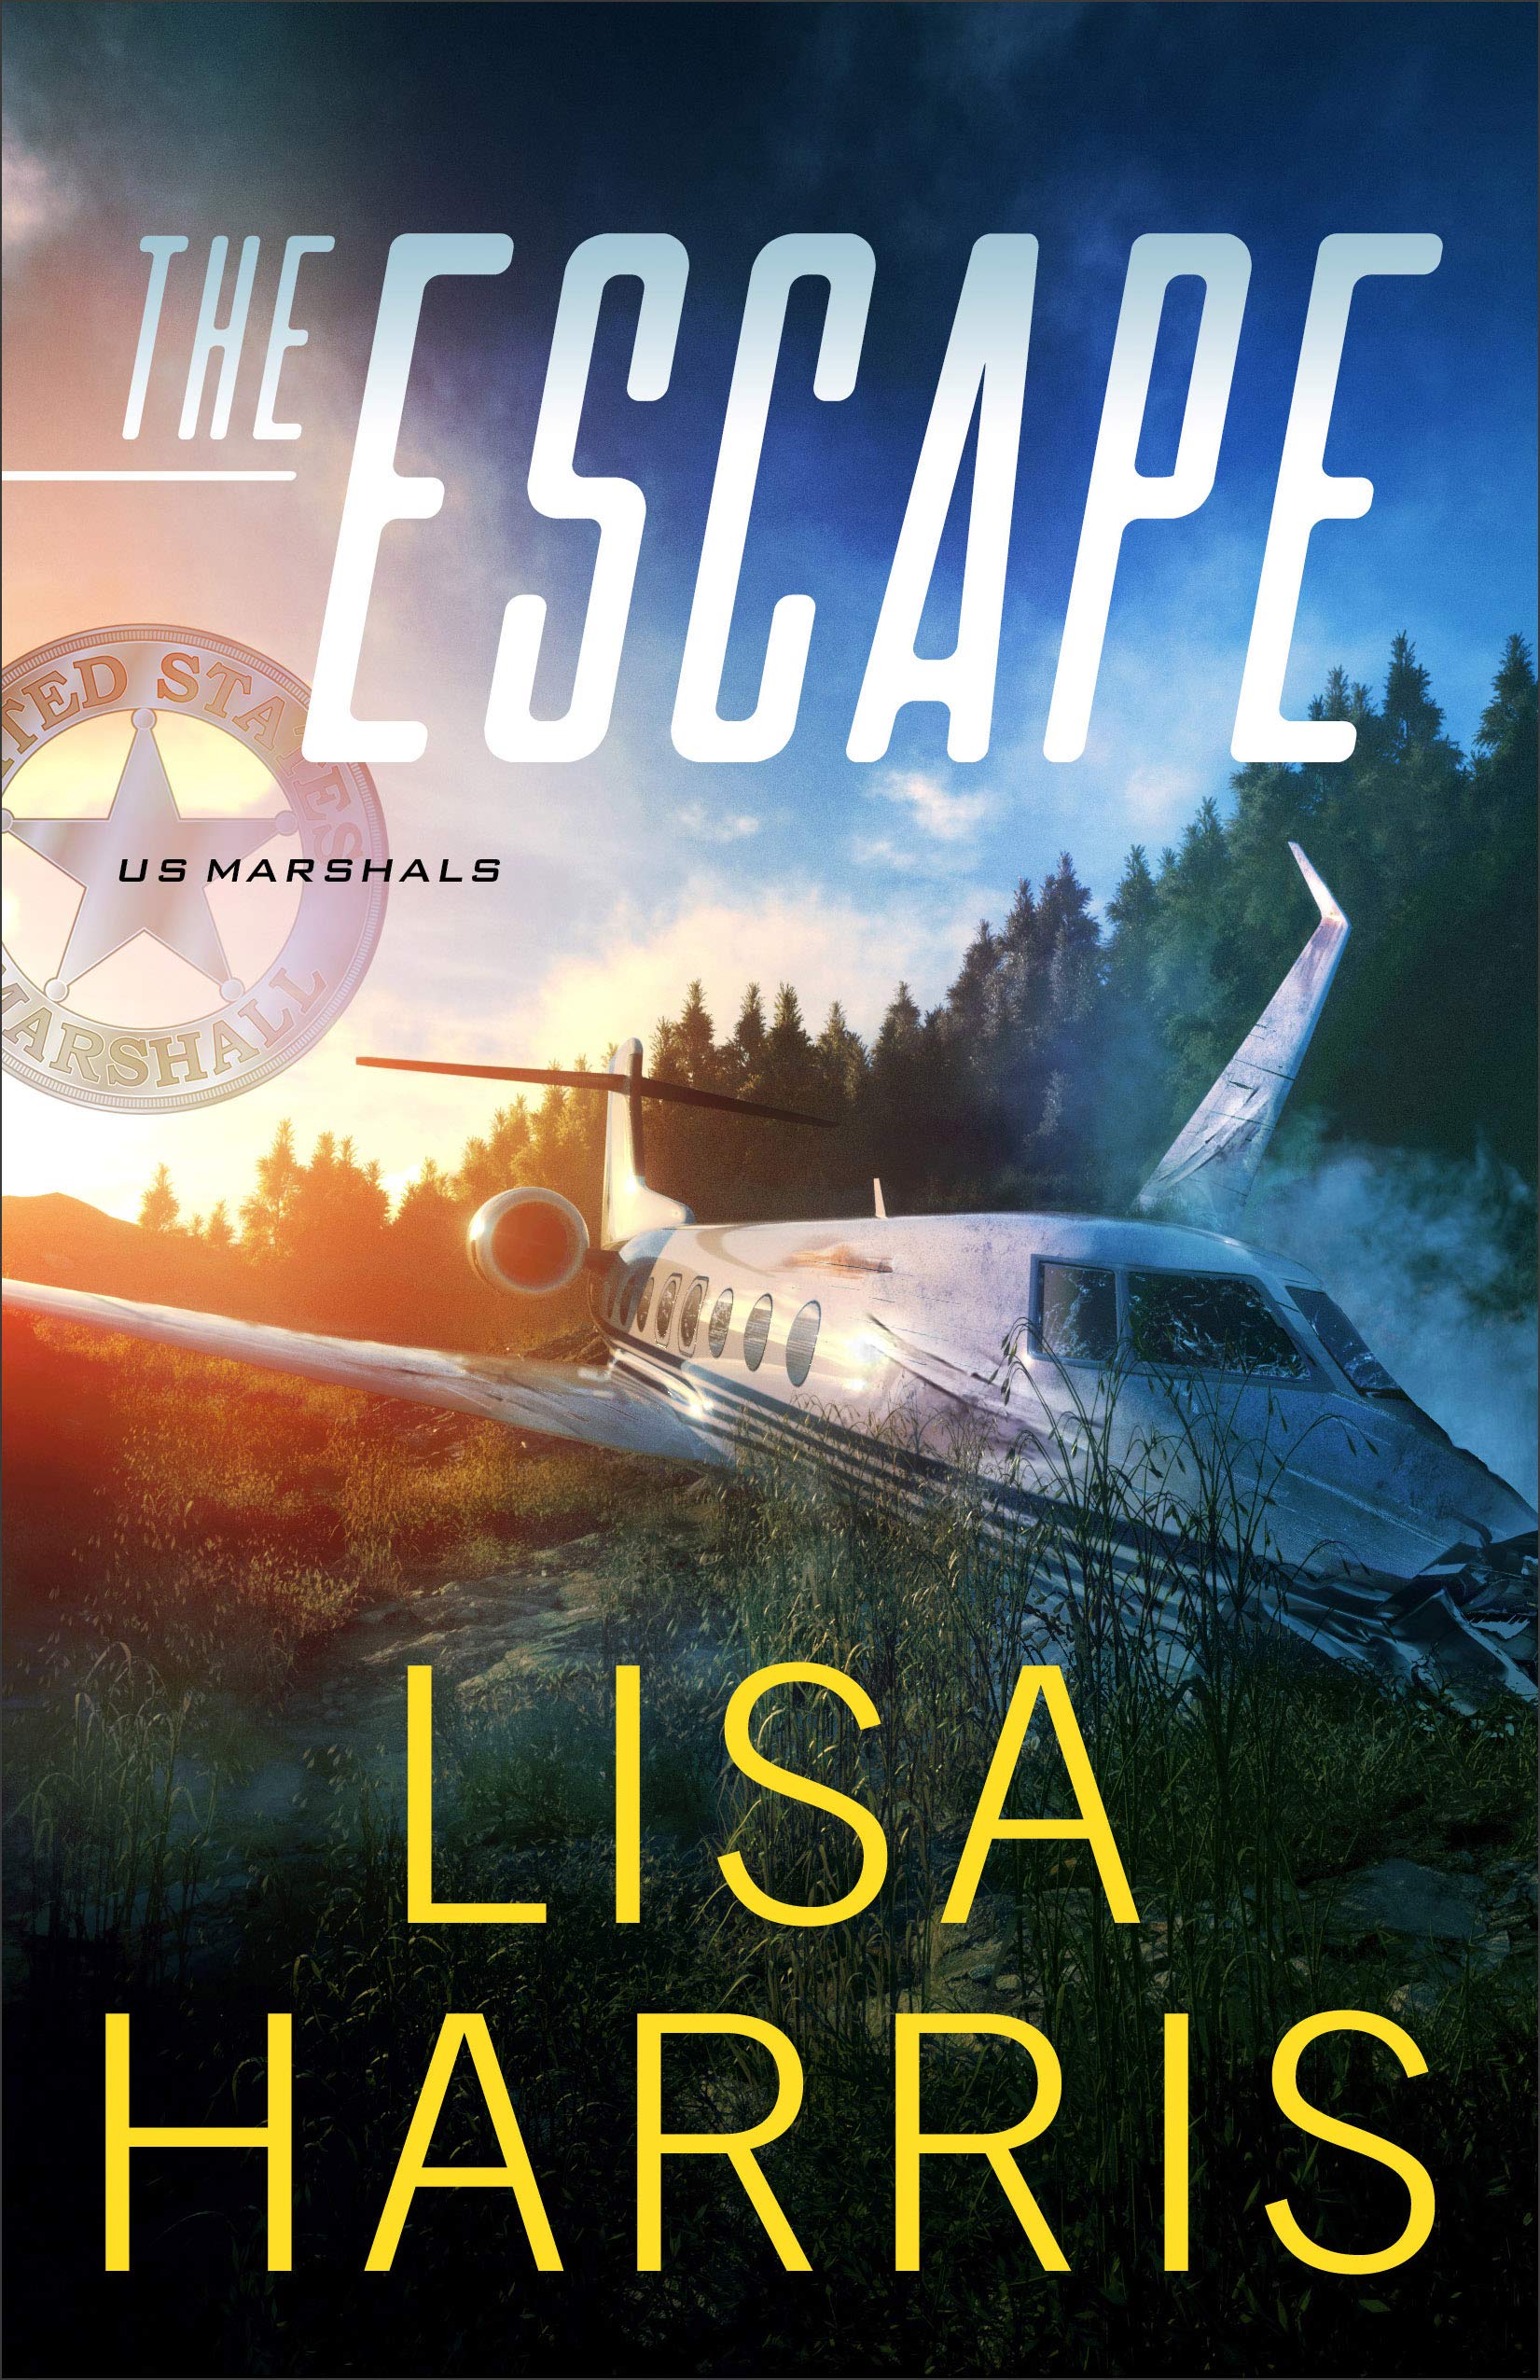 When Does The Escape (US Marshals 1) Come Out? 2020 Lisa Harris New Releases